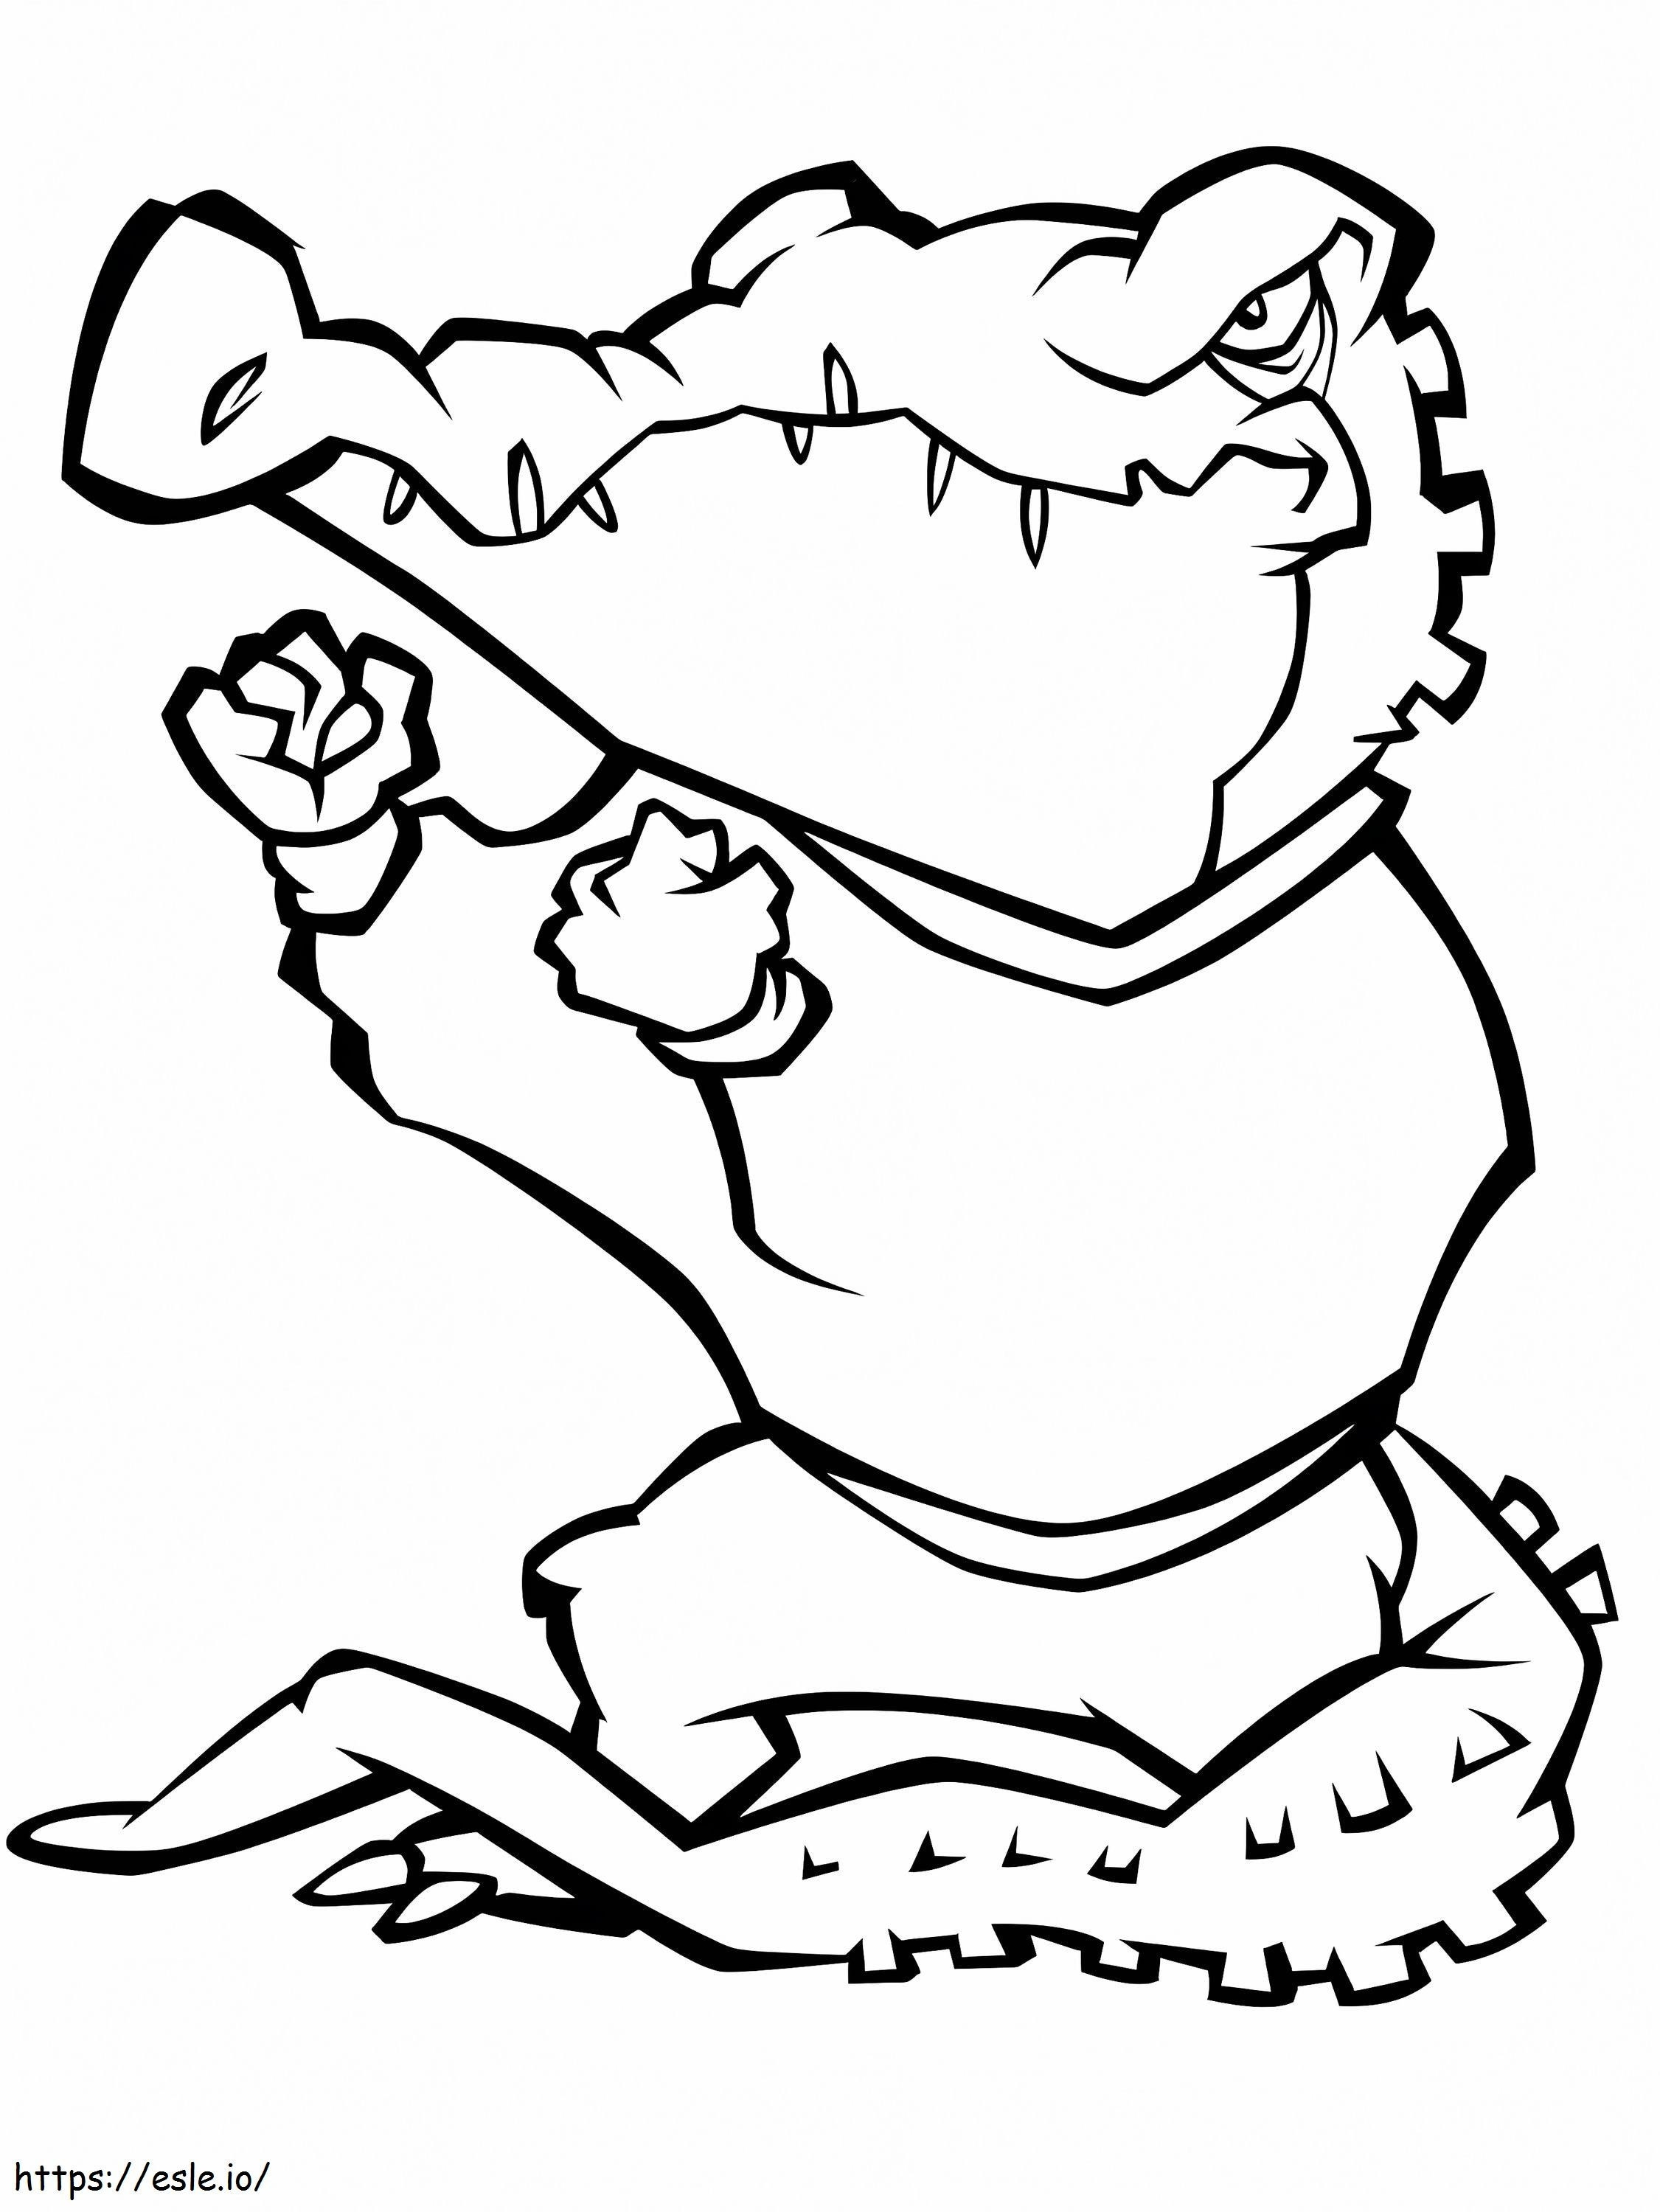 Fighting Alligator coloring page